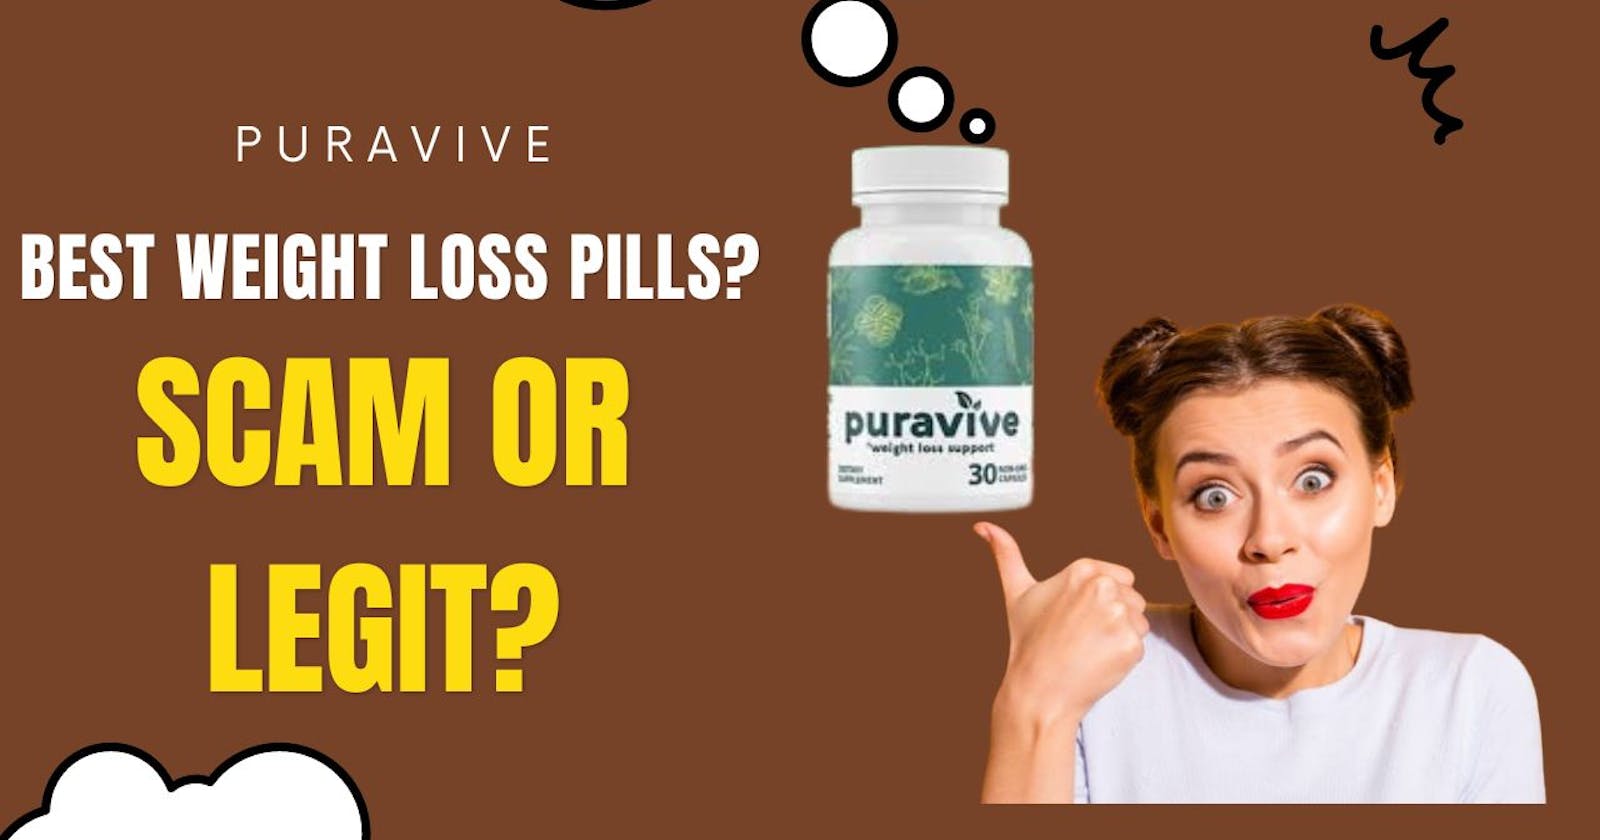 Warning Alert: Potential Risks Associated with Puravive Revealed! Customer Fake Reviews Exposed? Check the Latest Price & Where to Buy?